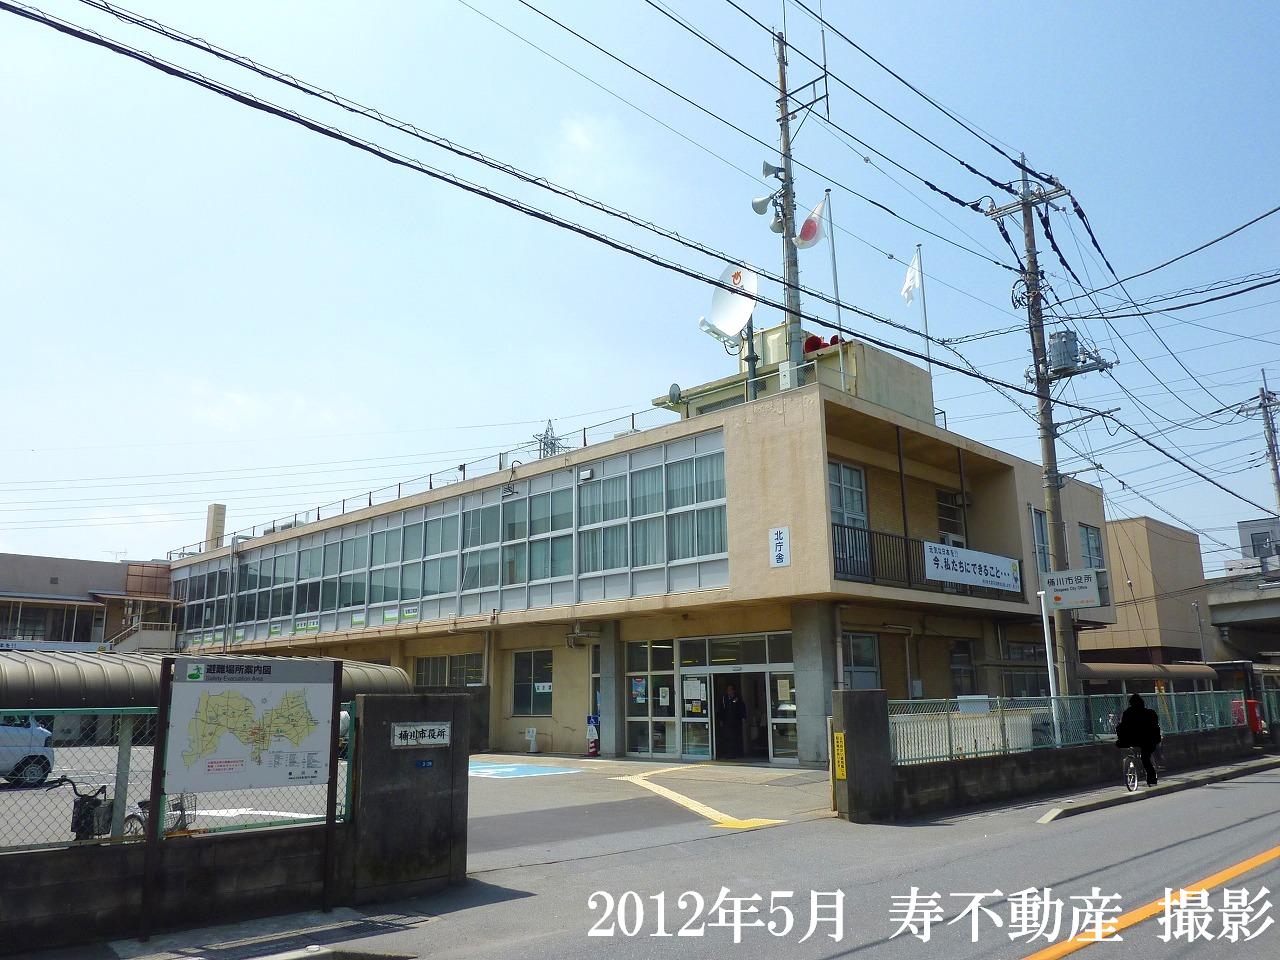 Government office. Okegawa 283m to City Hall (government office)